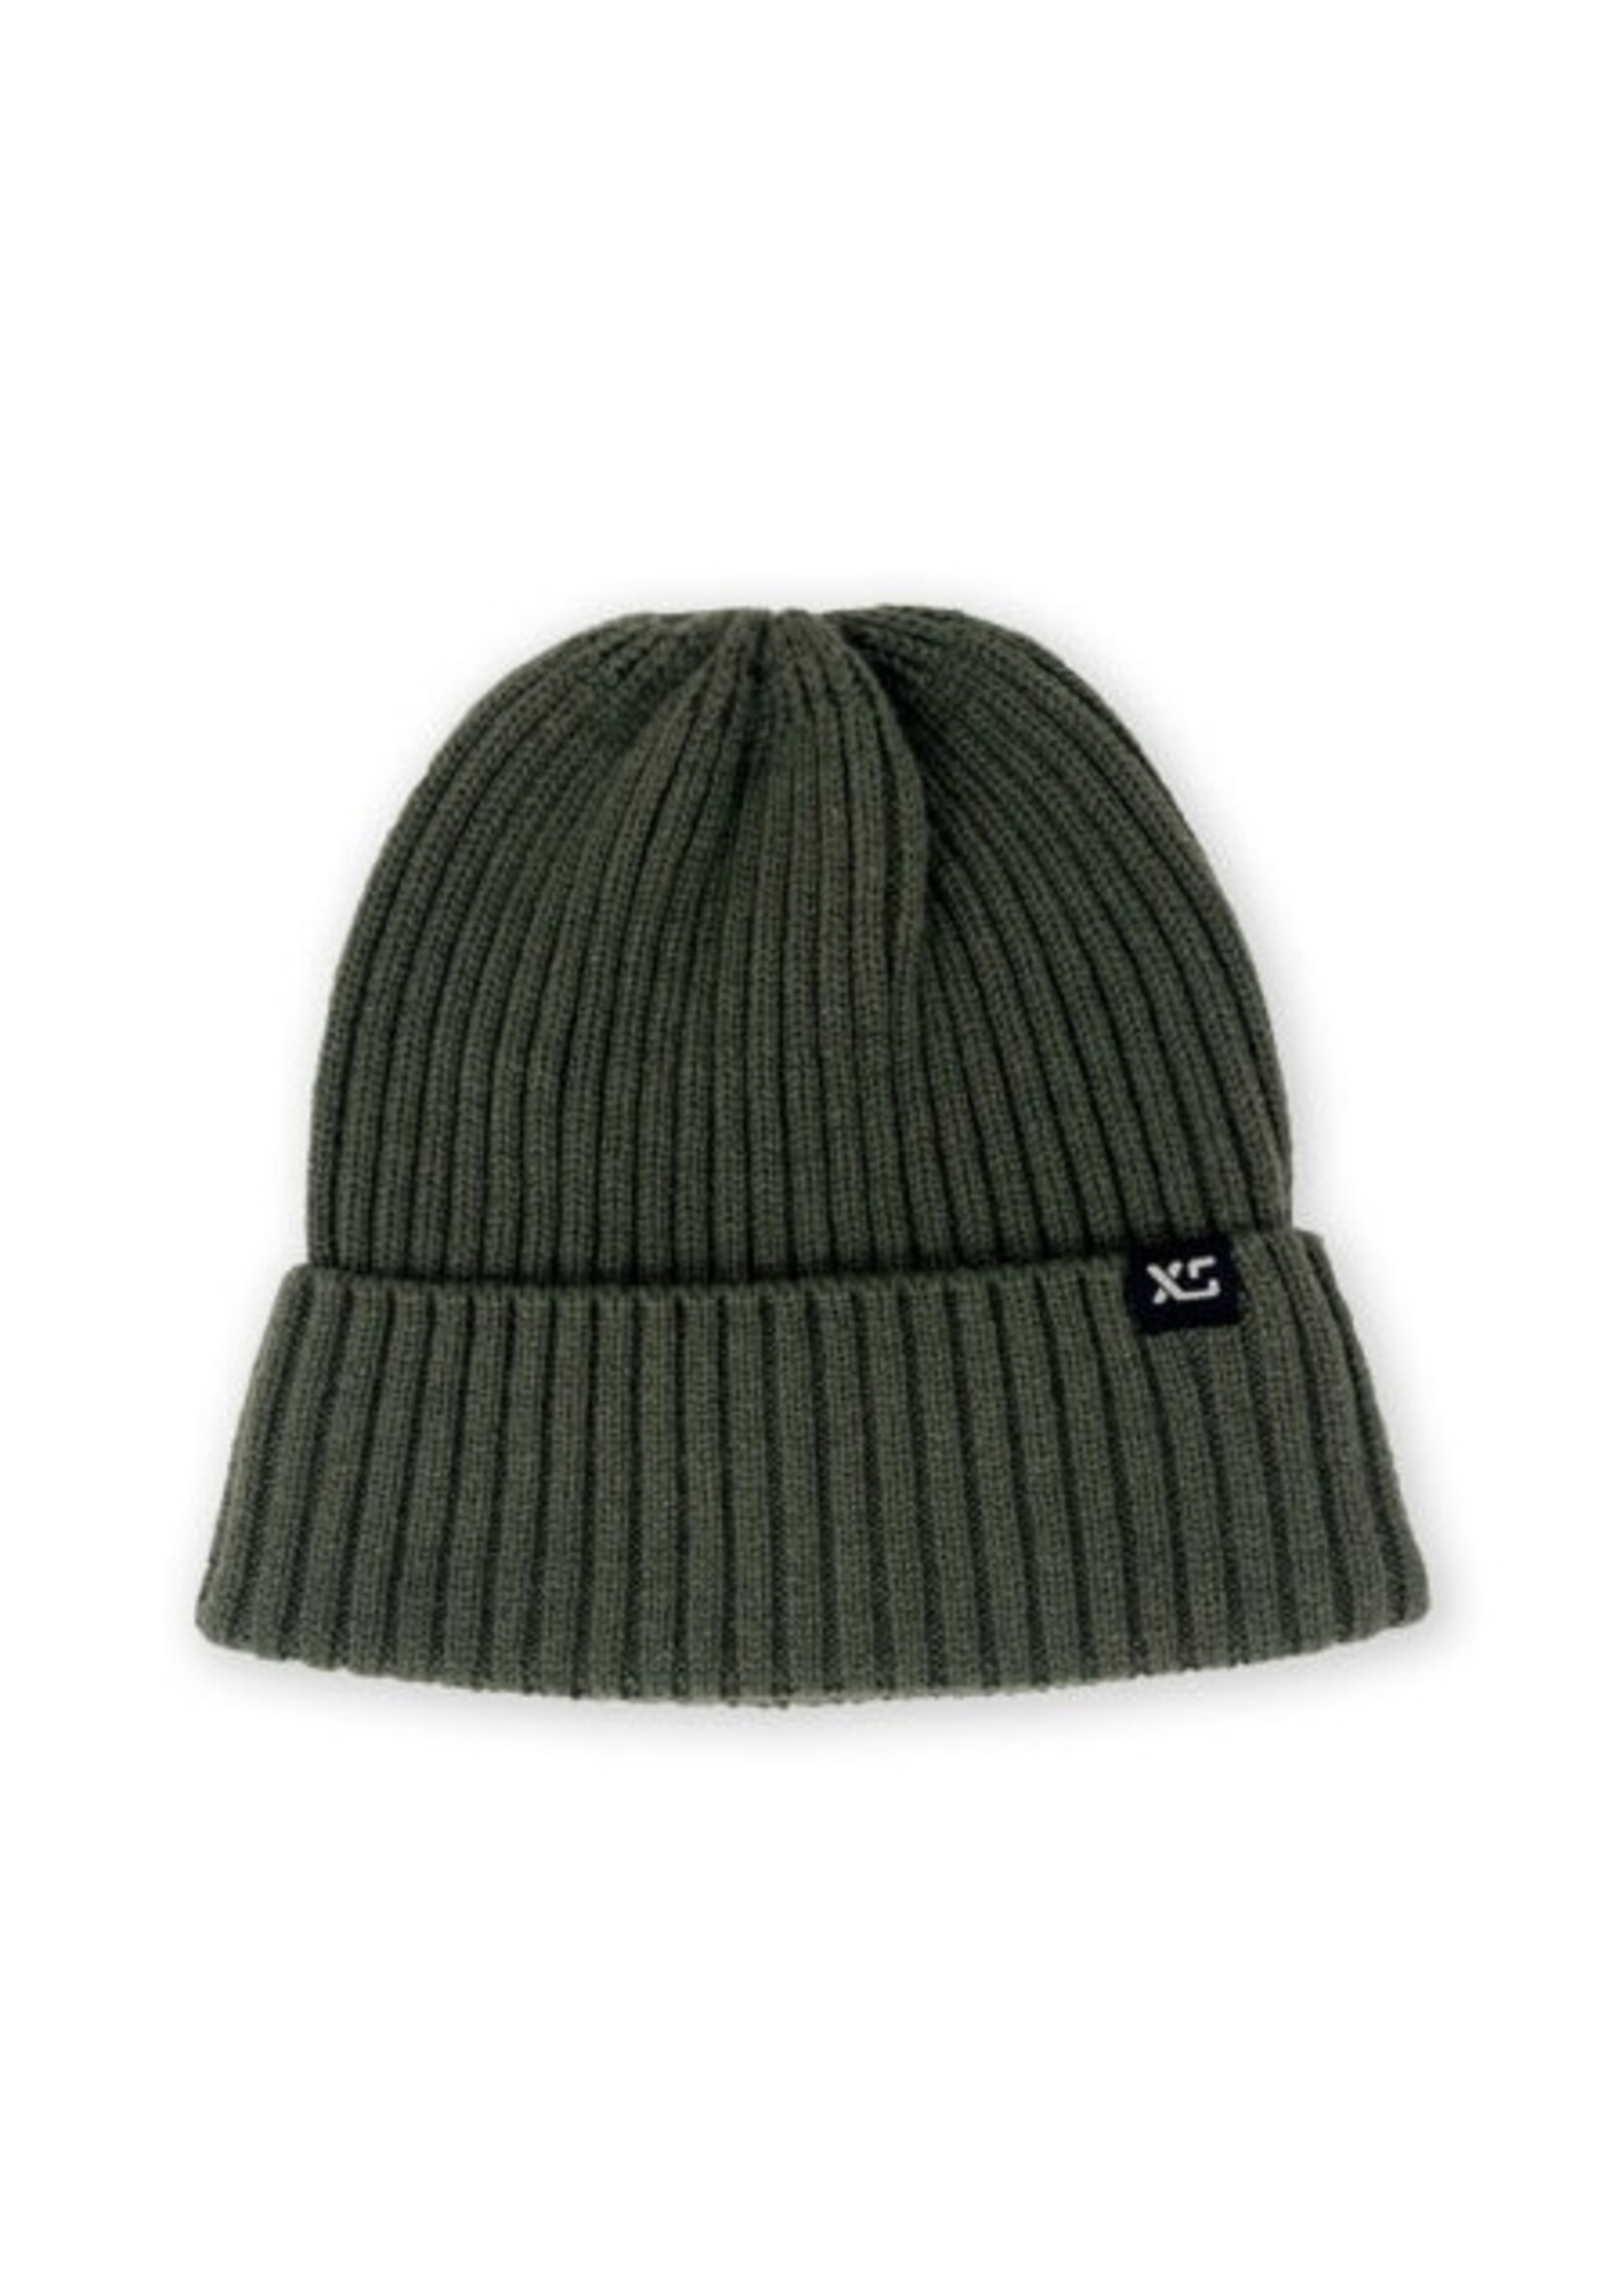 XS Unified Luxe beanies by XS Unified